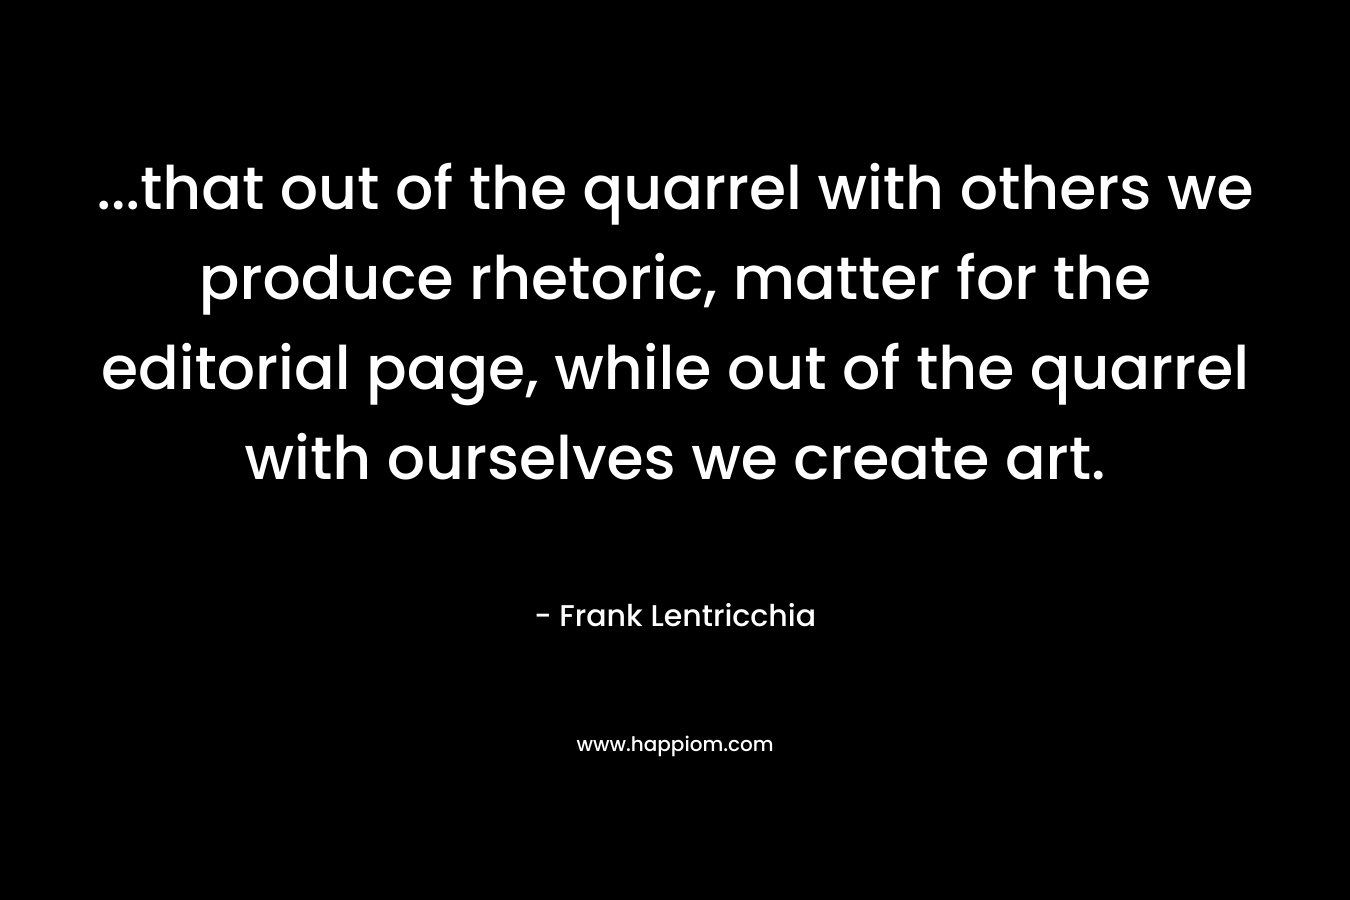 …that out of the quarrel with others we produce rhetoric, matter for the editorial page, while out of the quarrel with ourselves we create art. – Frank Lentricchia